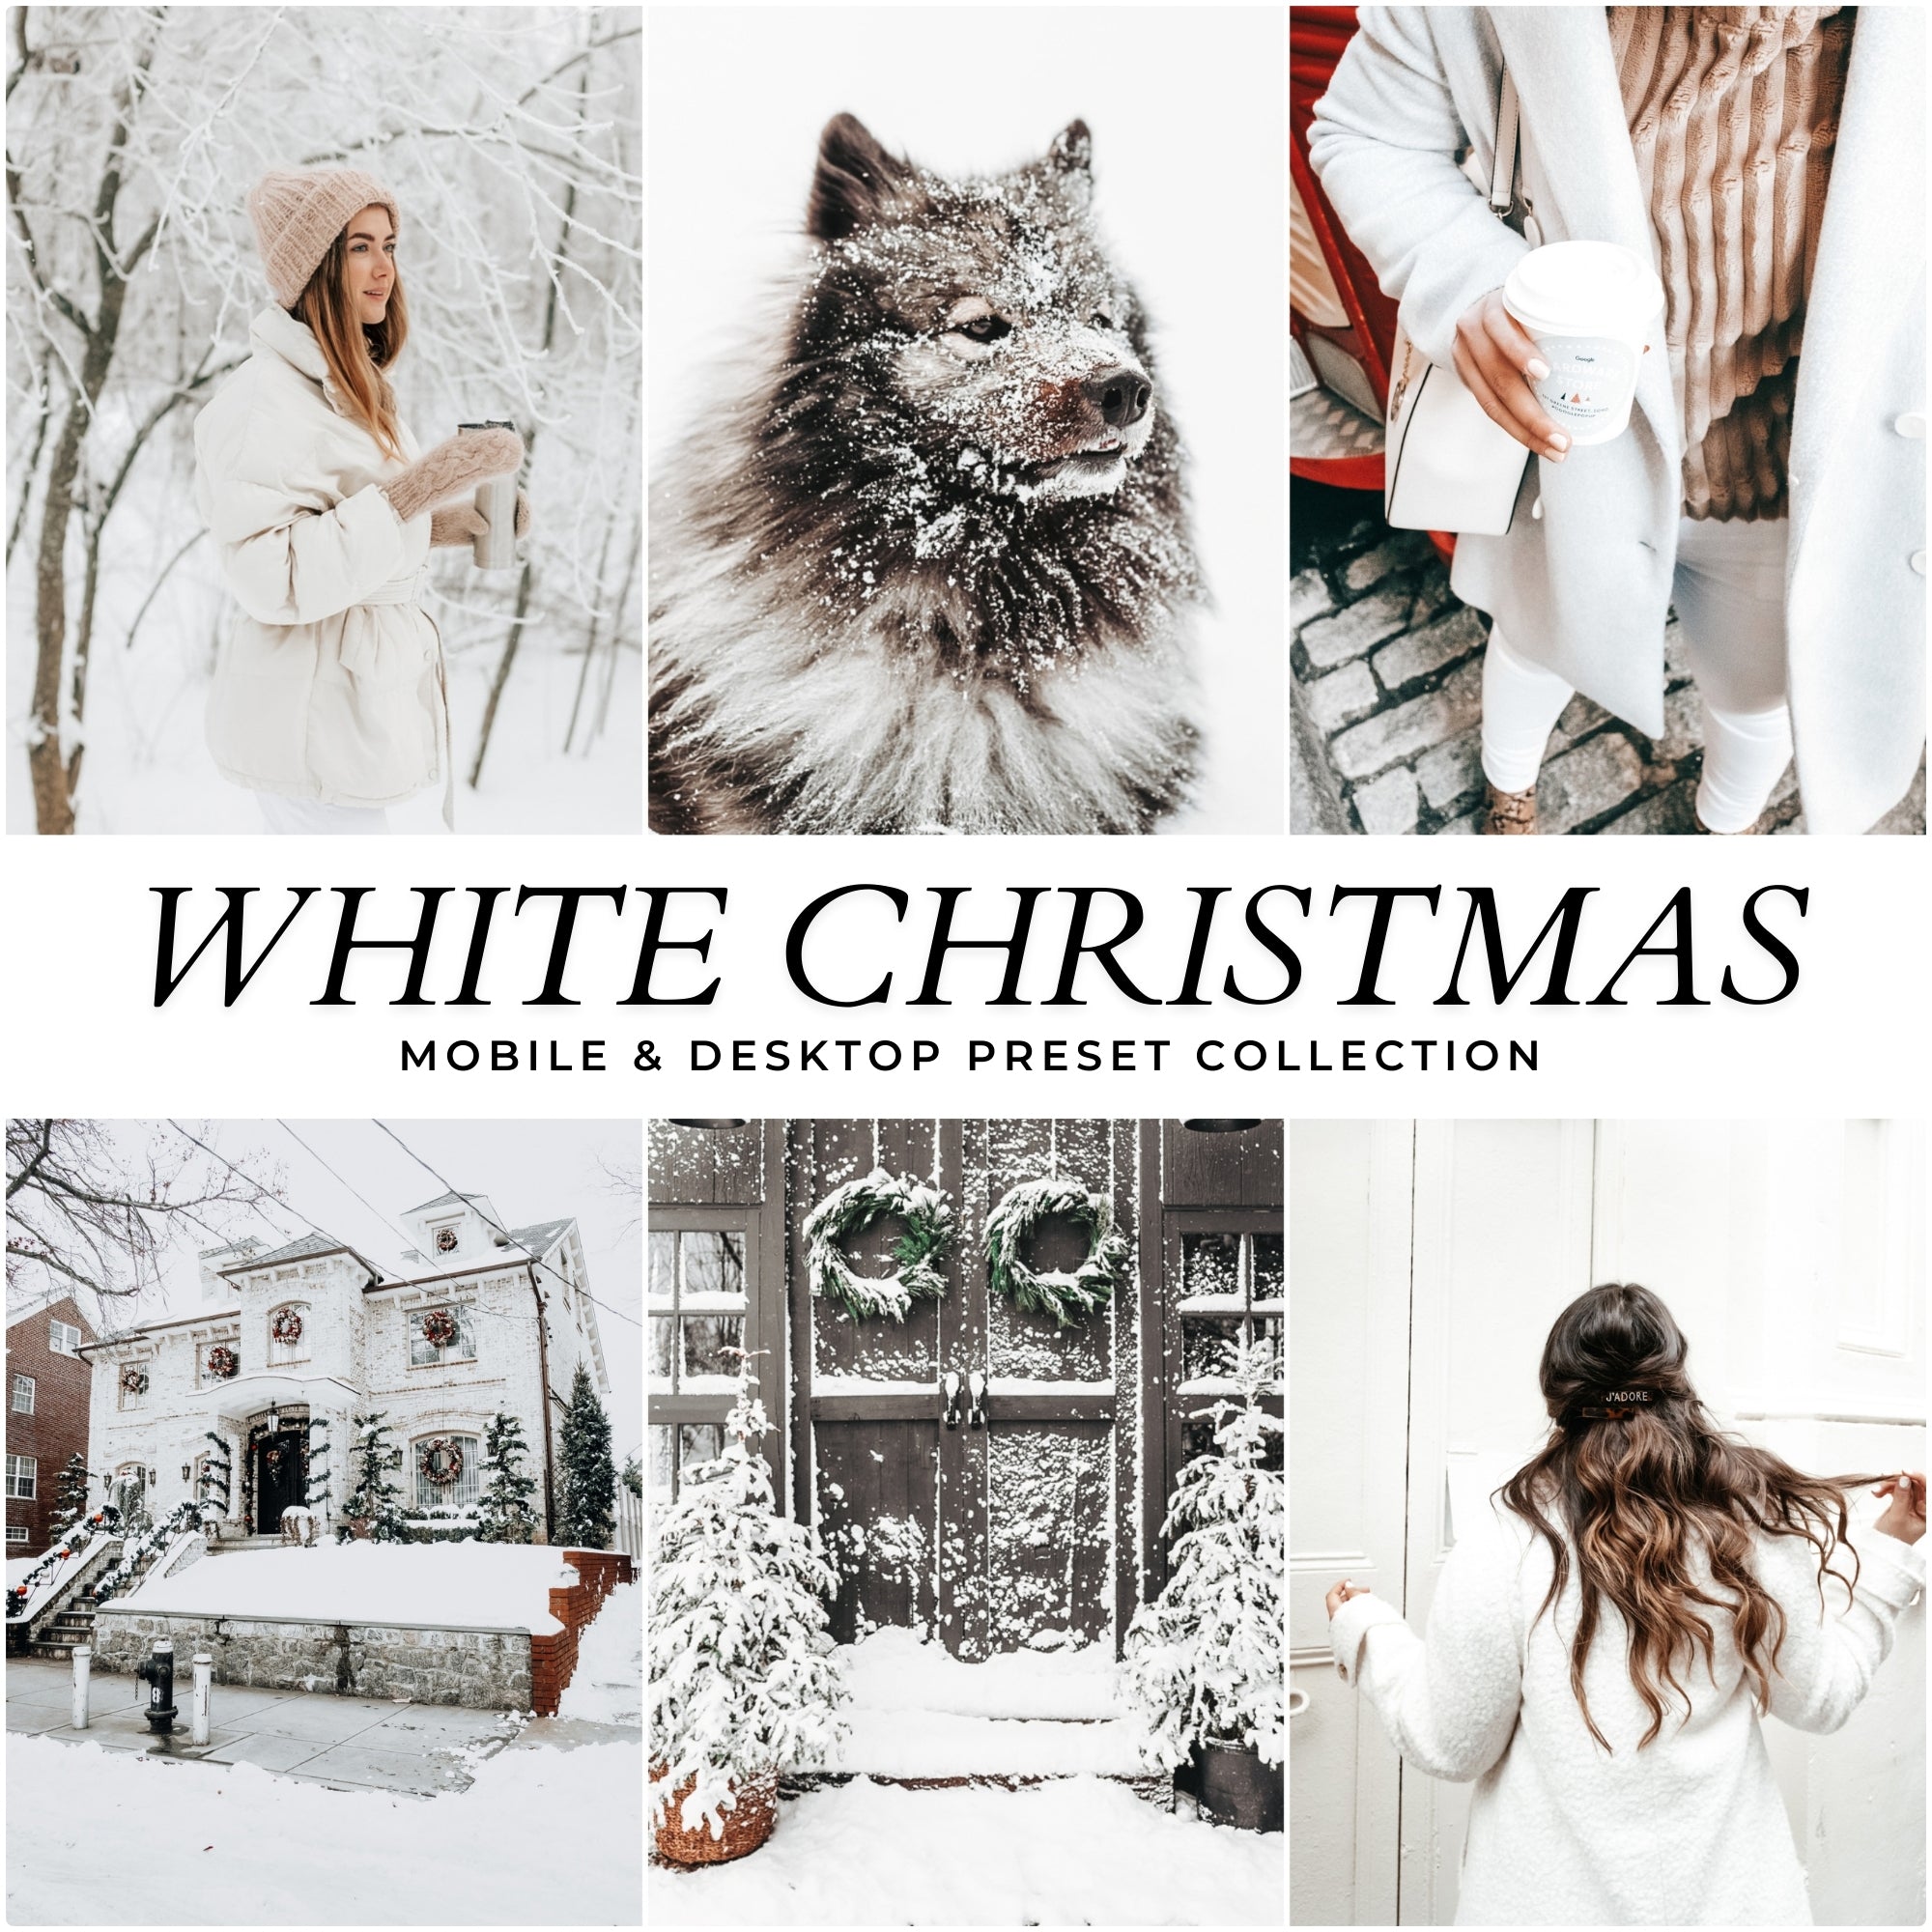 White Christmas Lightroom Presets For Photographers and Instagram Influencers Photo Editing In Adobe Lightroom By Lou And Marks Presets